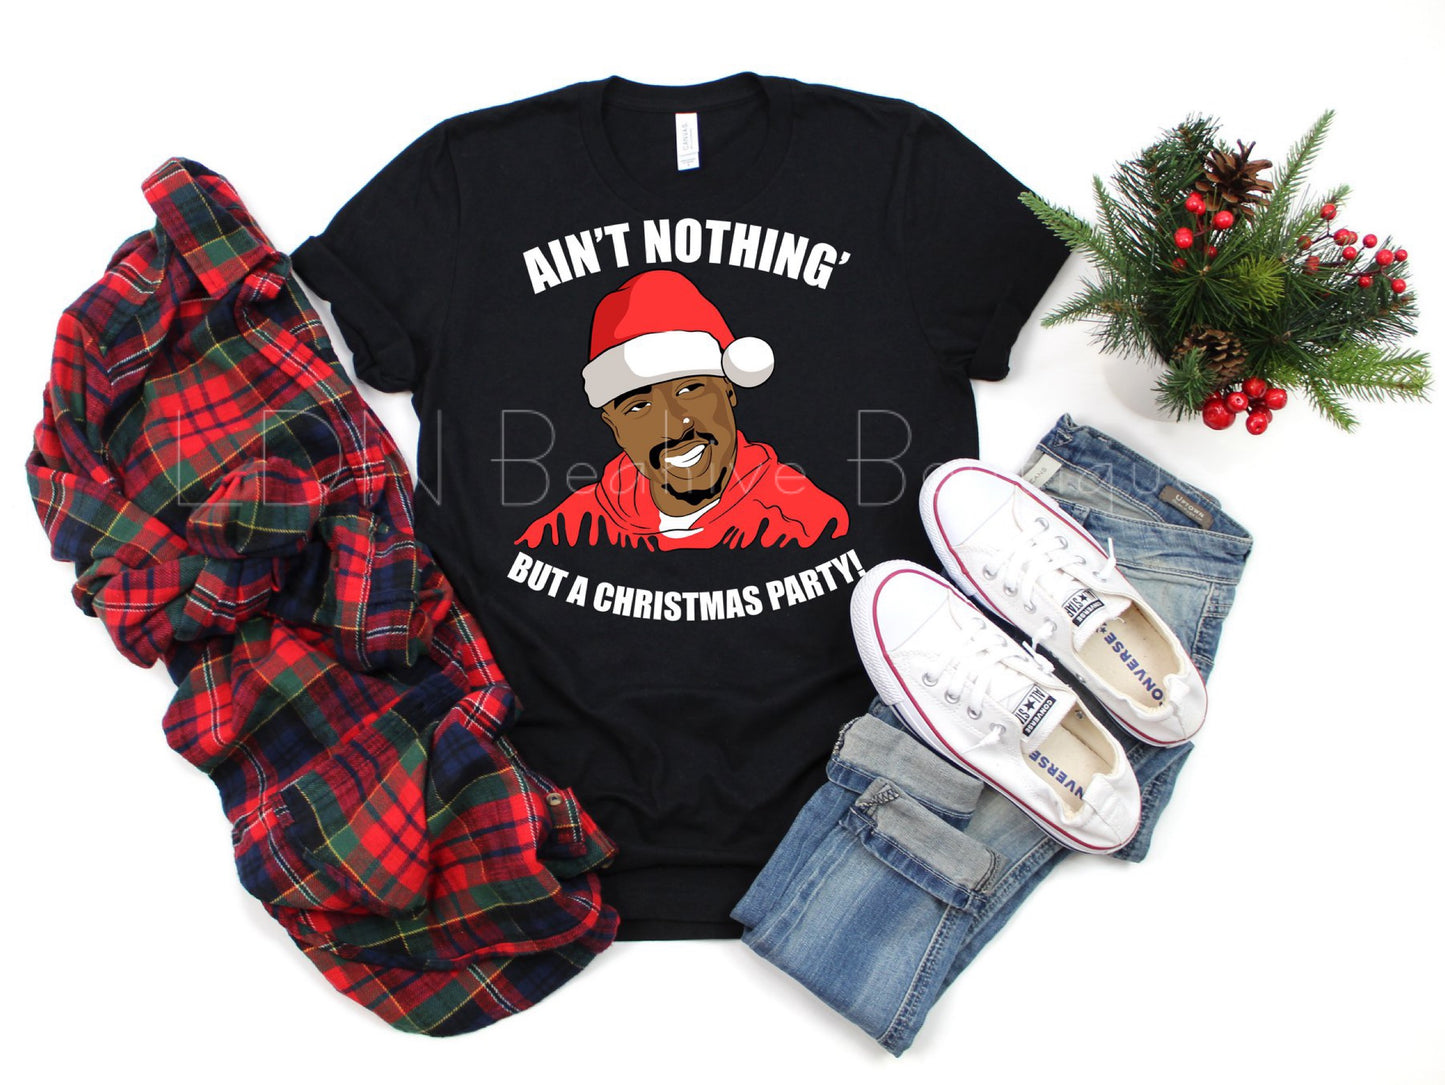 Tupac- Ain't Nothing But A Christmas Party - Beahive Boutique